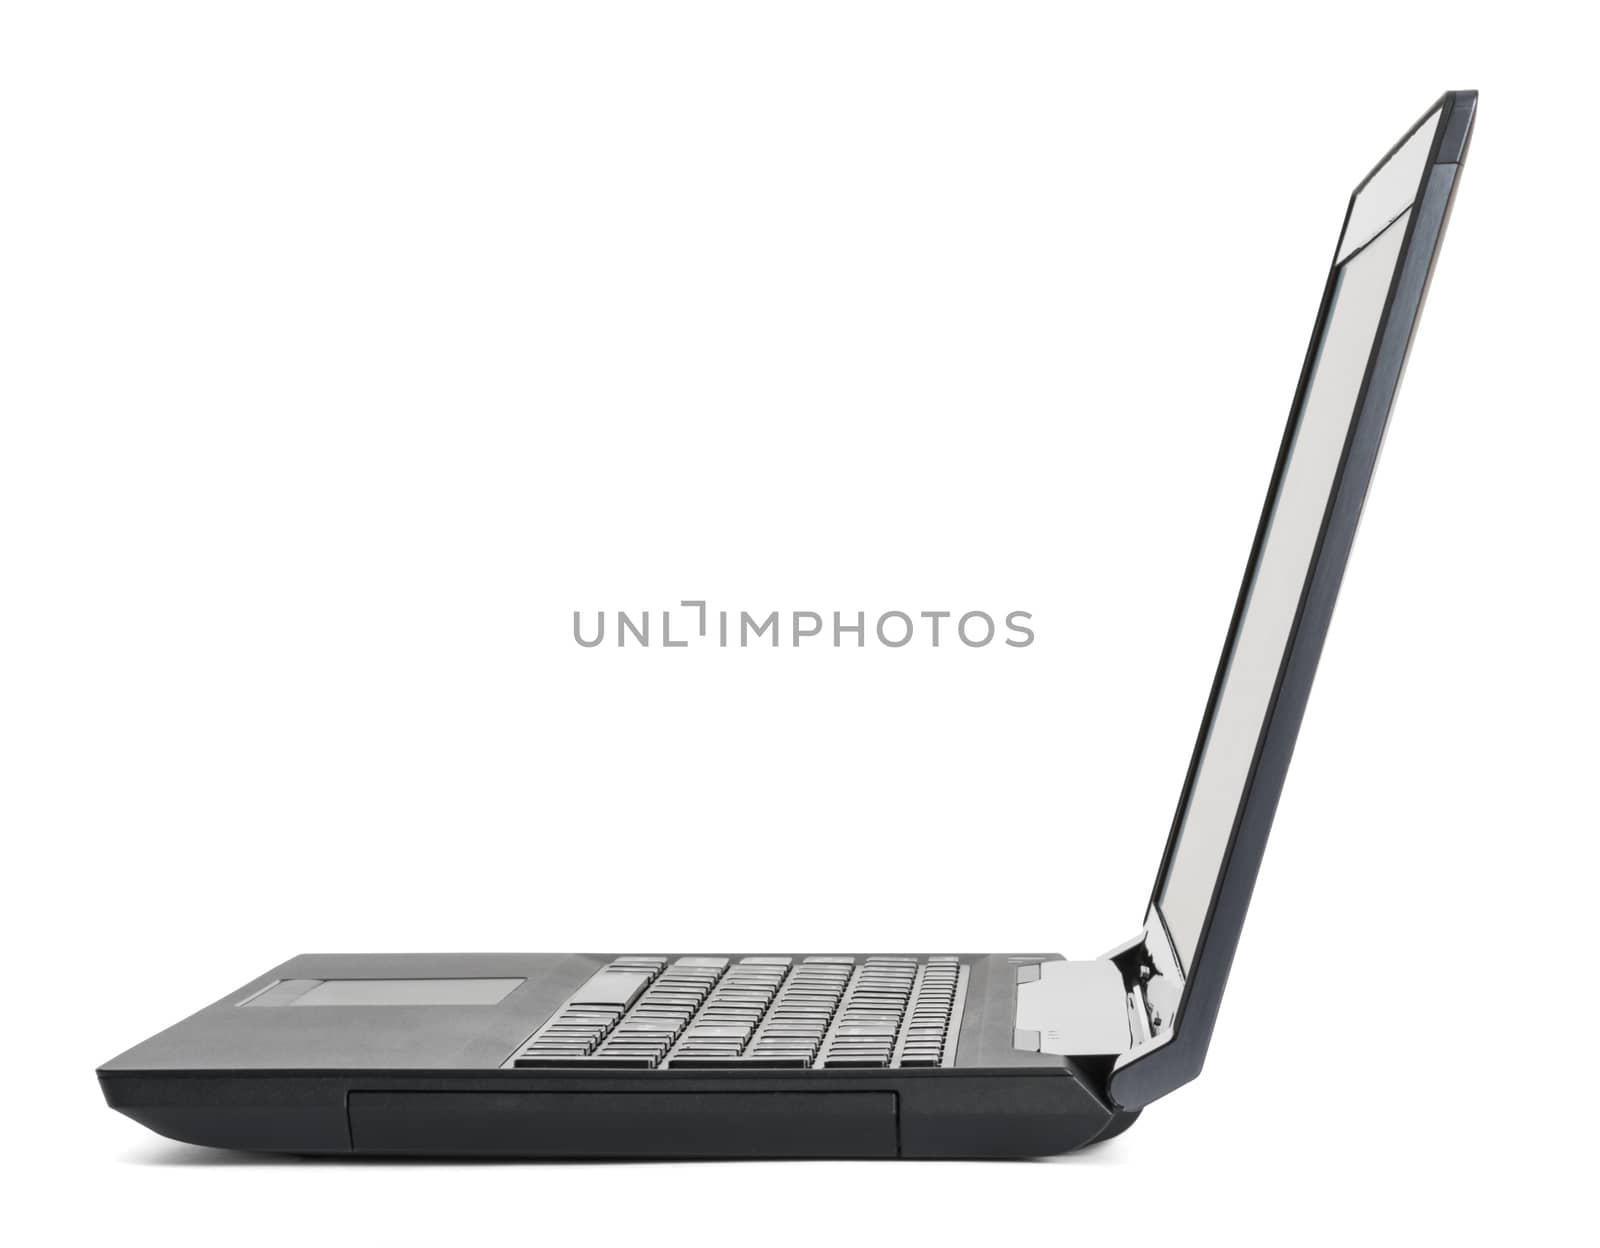 Laptop on white, side view by cherezoff